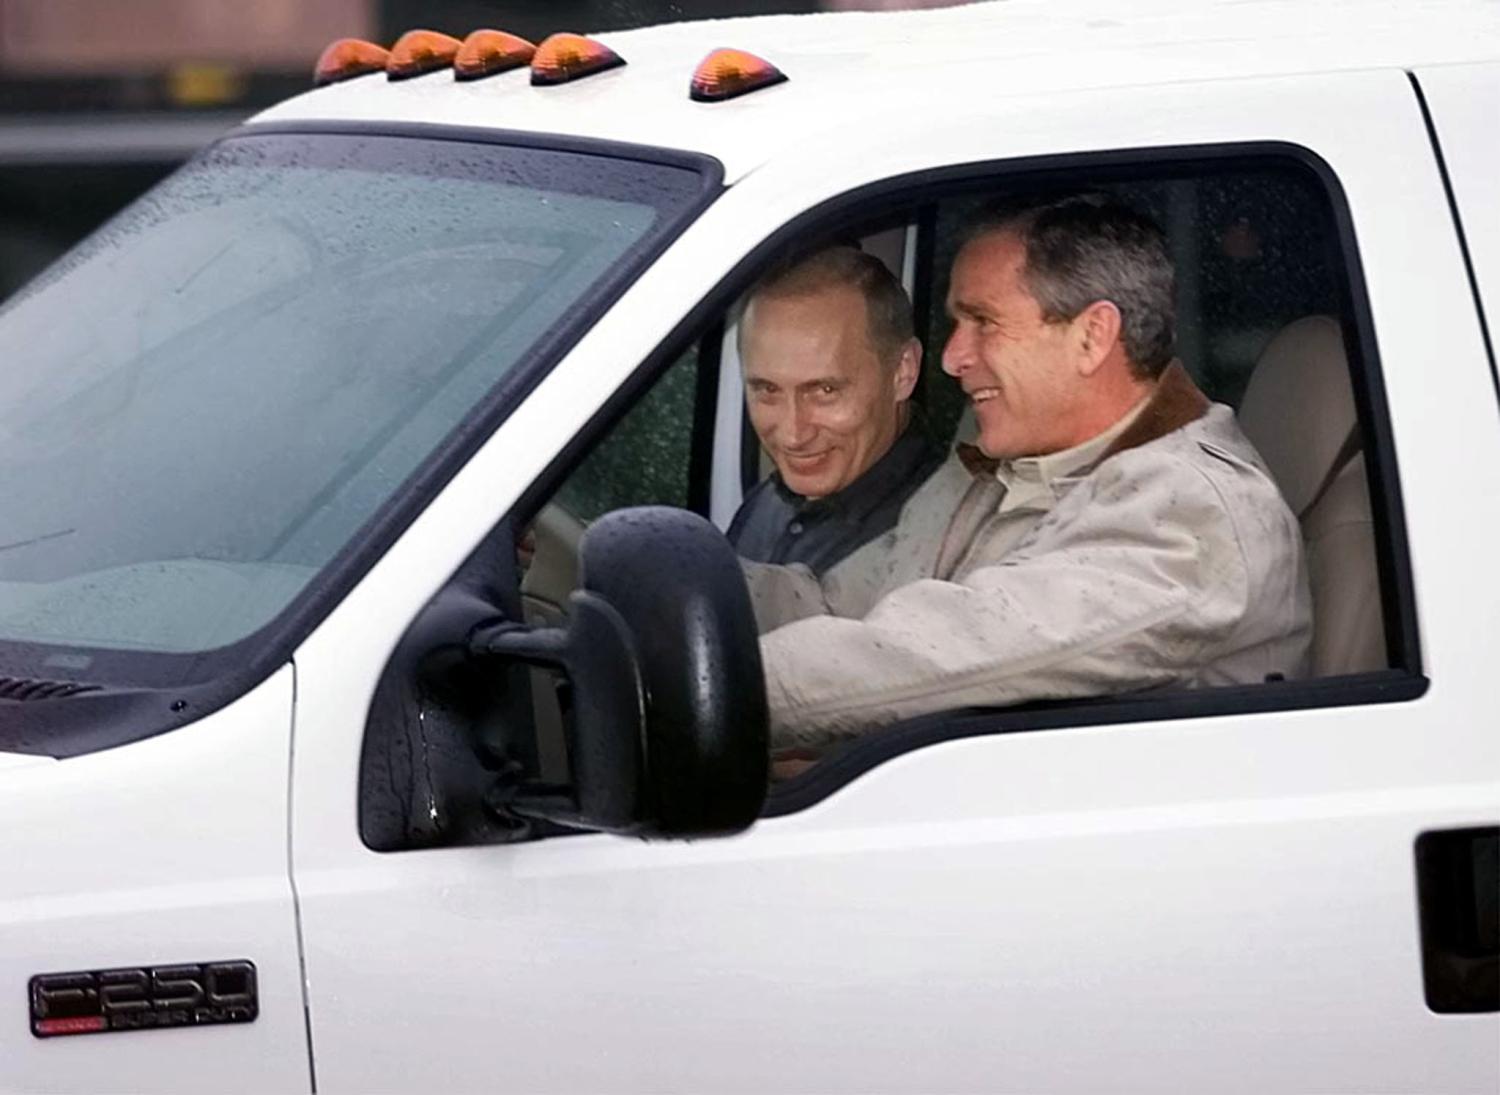 U.S. President George W. Bush rides with Russian President Vladimir Putin in the front of his pickup truck as he welcomes Putin to his ranch in Crawford, Texas November 14, 2001. [Bush plans to treat Putin to Western-style entertainment and tour of his beloved ranch, as well as follow up on their talks in Washington on Tuesday on a new strategic relationship. ] Win McNamee / Reuters.